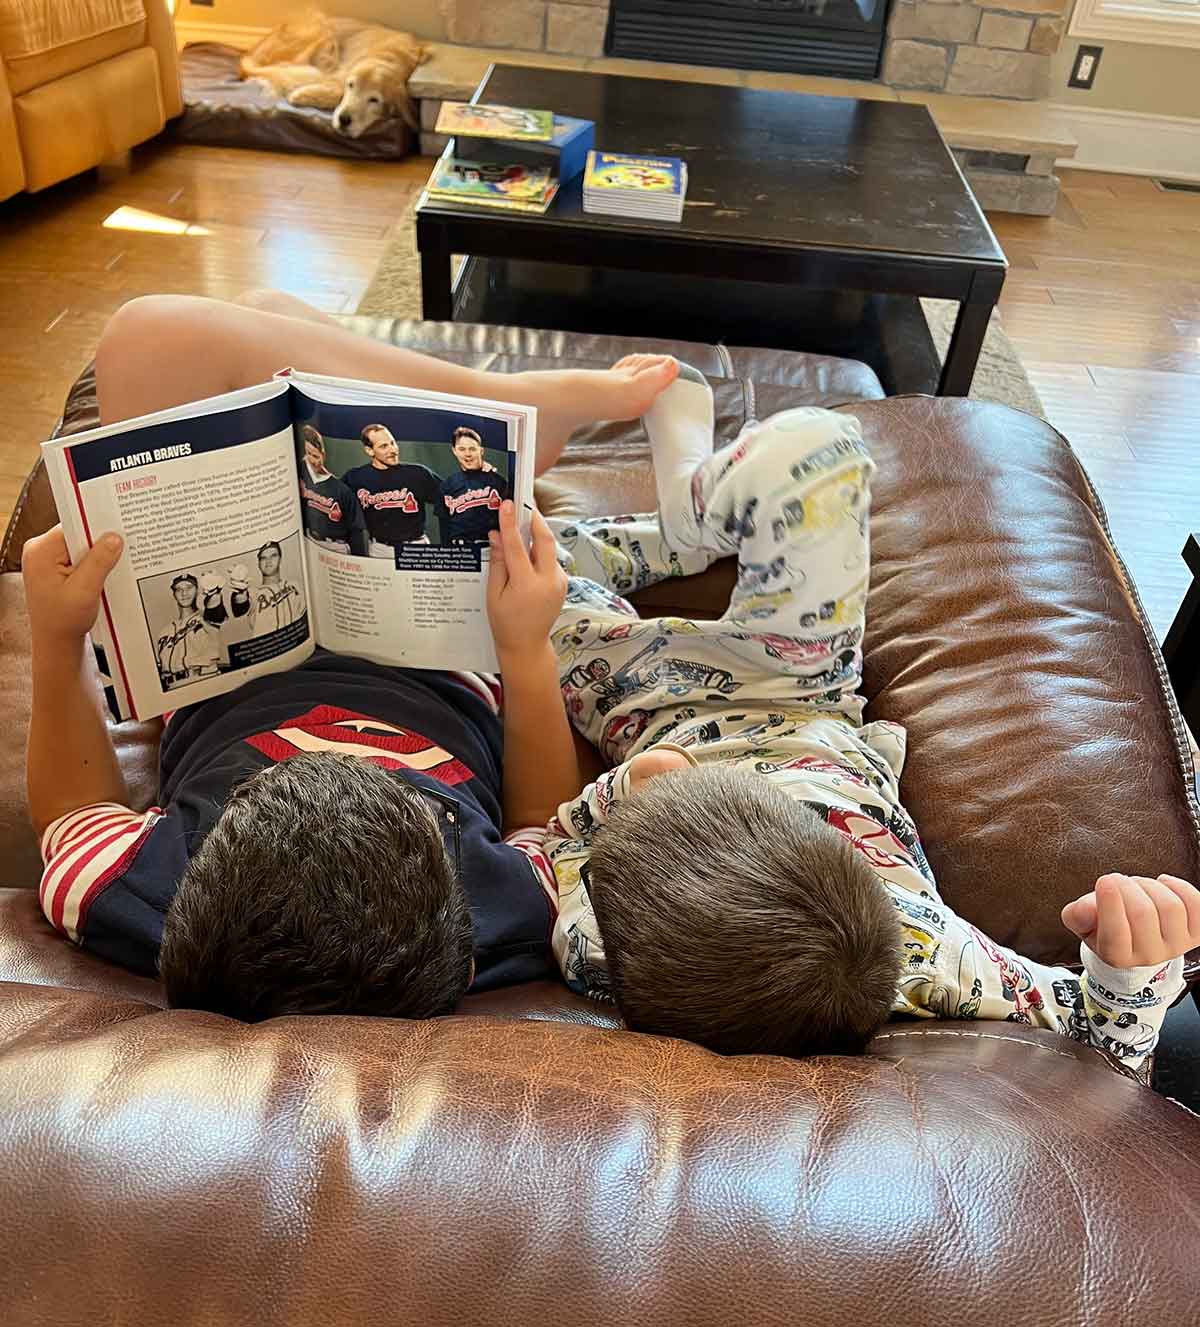 Two boys sitting next to each other on a couch reading a baseball magazine.